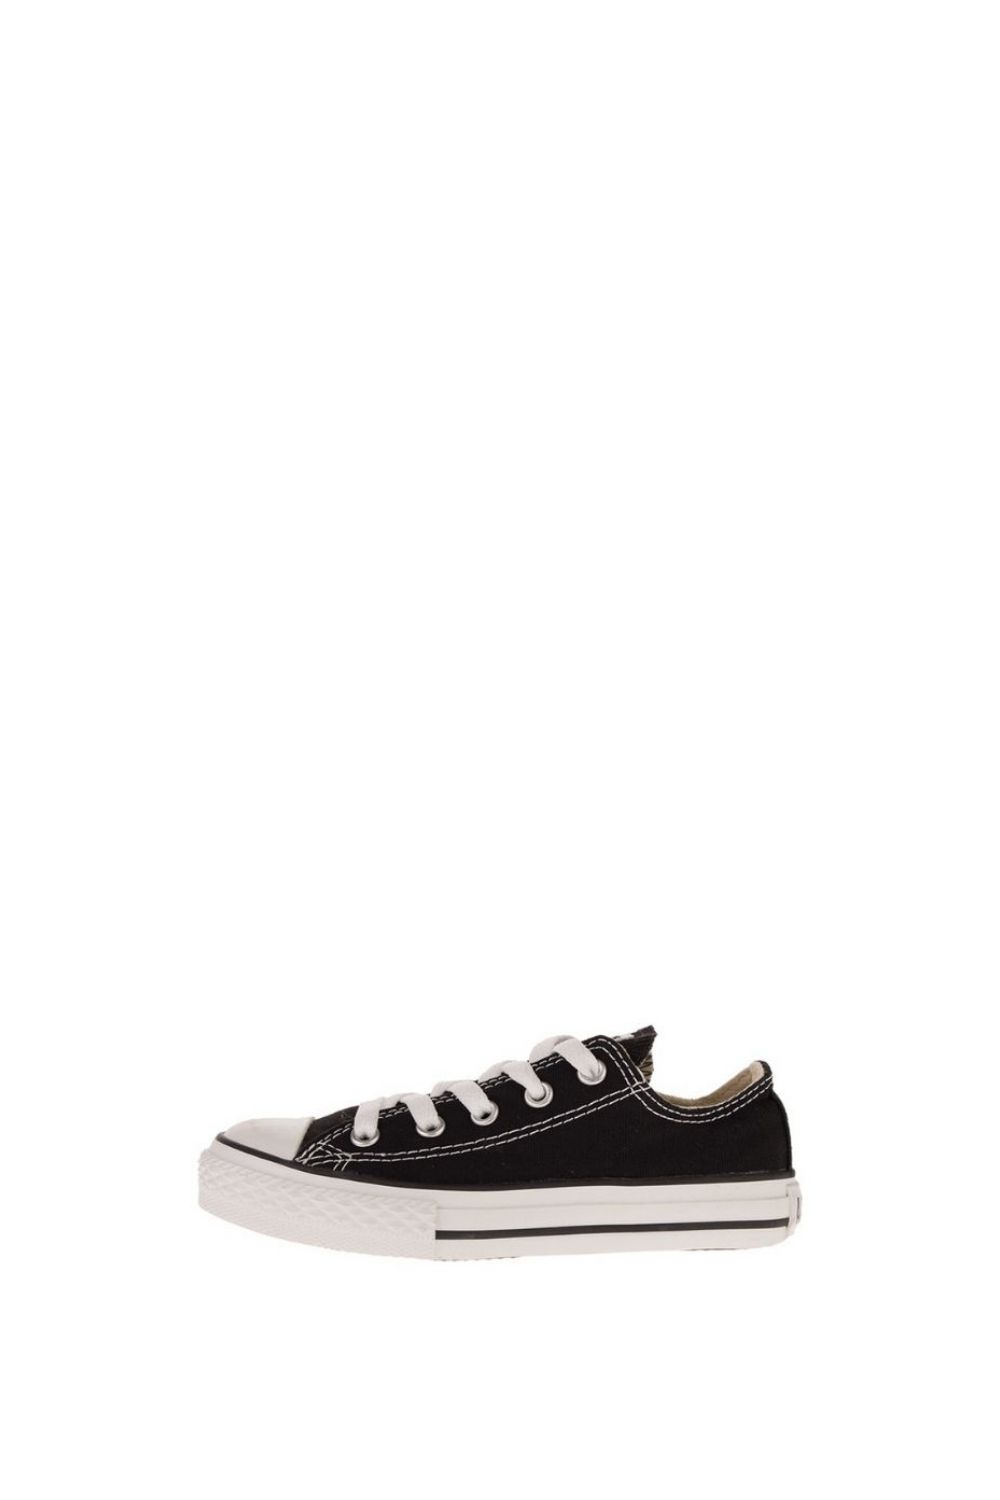 CONVERSE - Παιδικά sneakers CONVERSE Chuck Taylor AS Core OX μαύρα Παιδικά/Girls/Παπούτσια/Sneakers